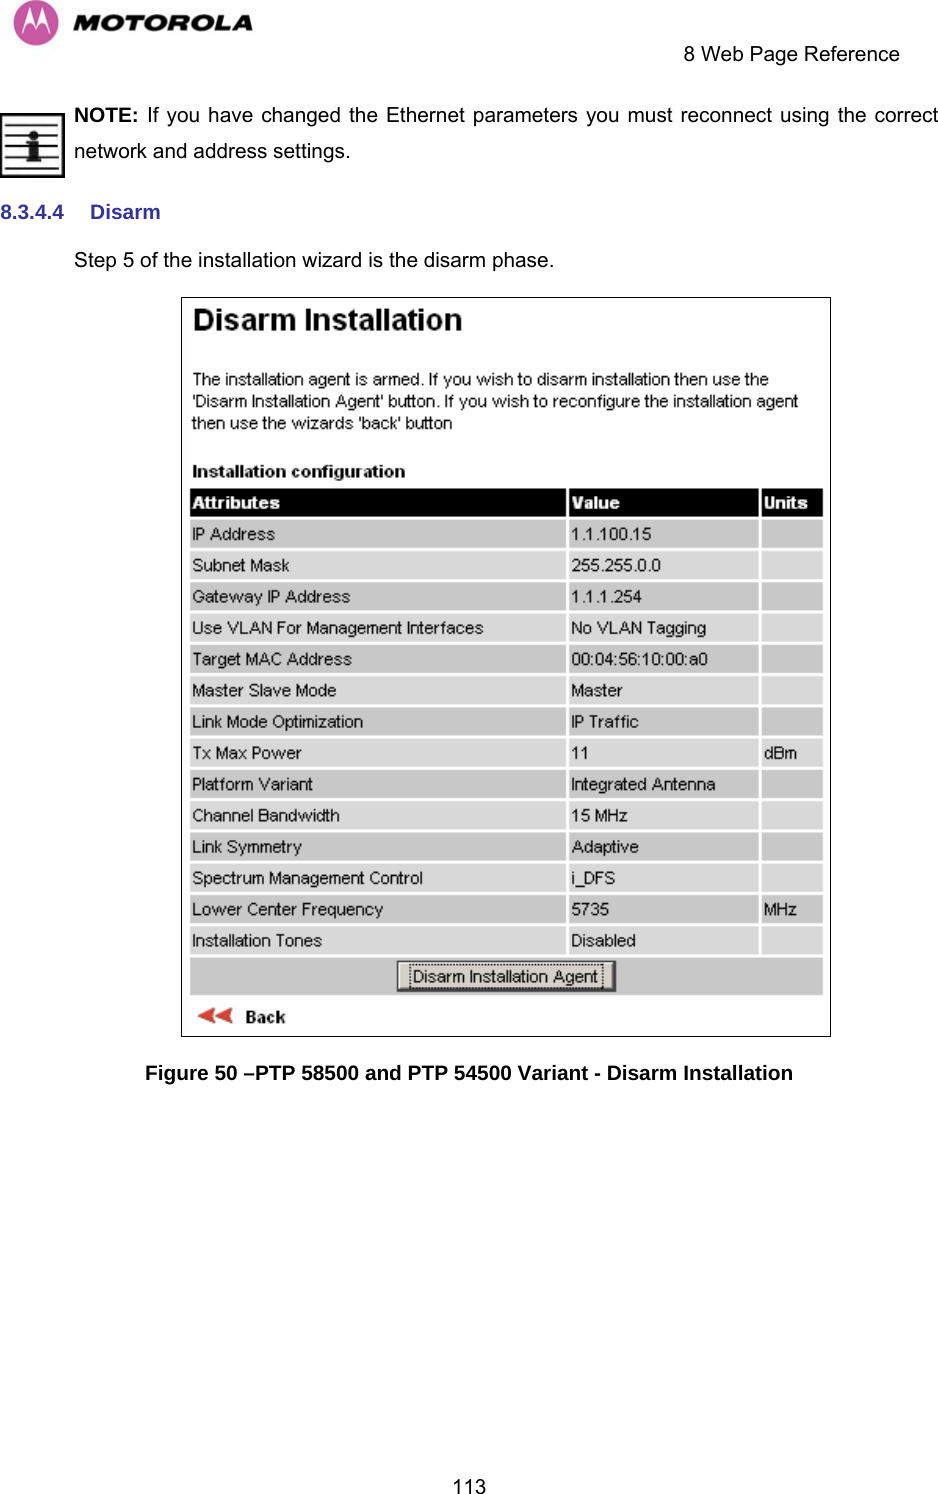     8 Web Page Reference  113NOTE: If you have changed the Ethernet parameters you must reconnect using the correct network and address settings. 8.3.4.4  Disarm Step 5 of the installation wizard is the disarm phase.  Figure 50 –PTP 58500 and PTP 54500 Variant - Disarm Installation   